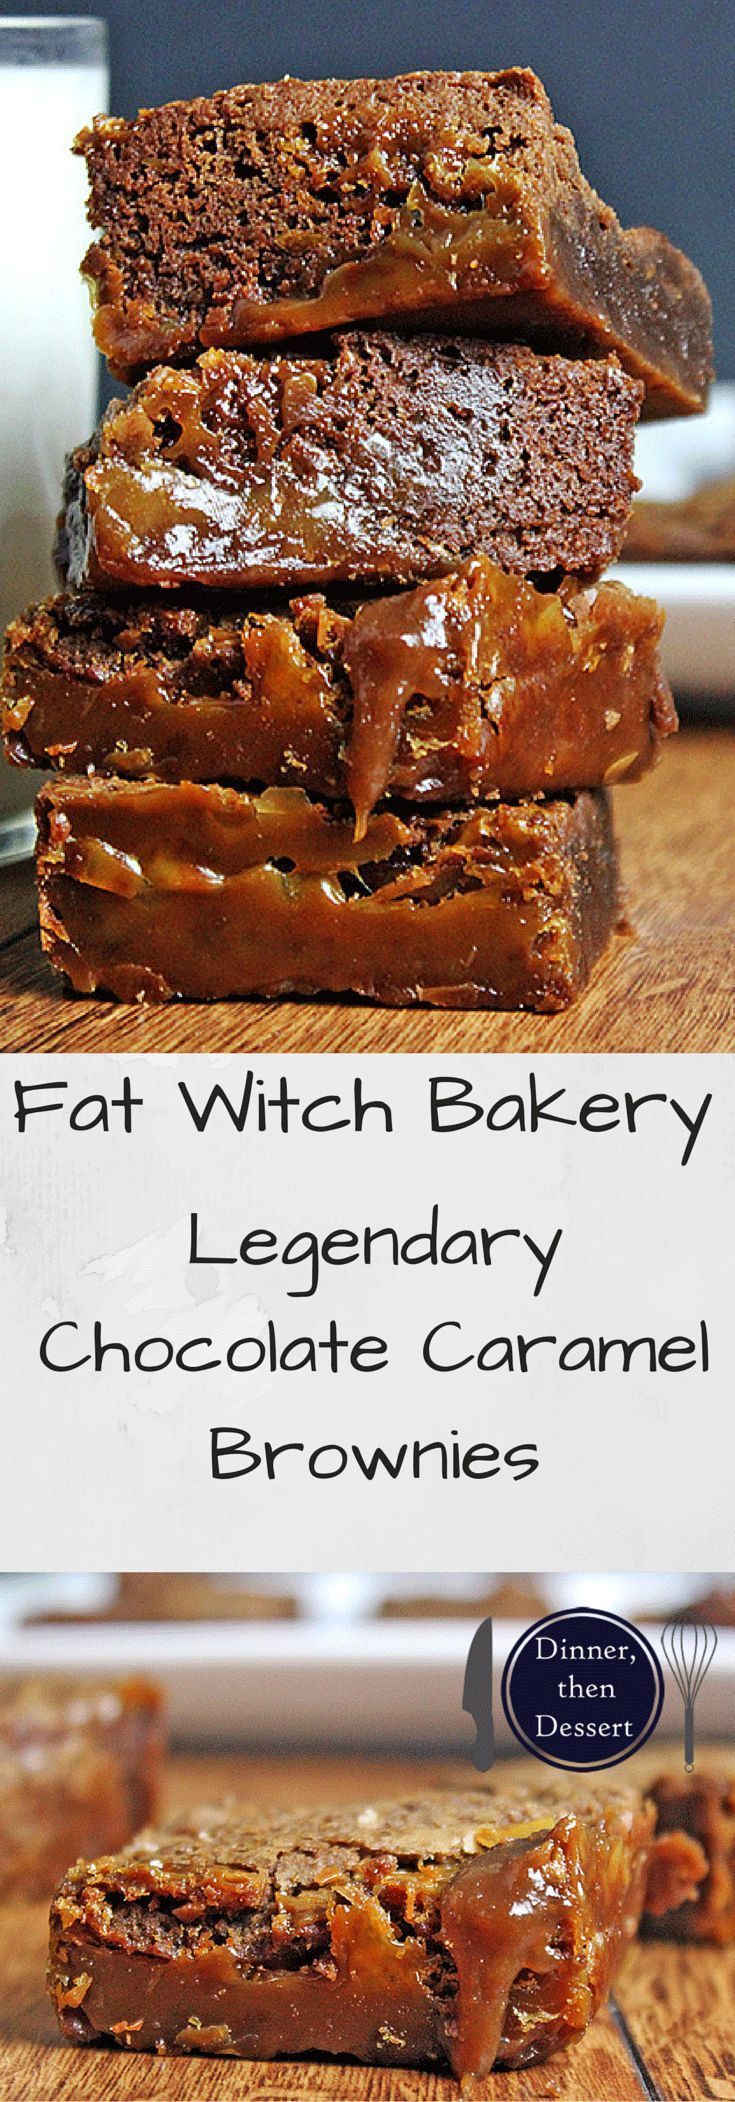 Fat Witch Bakery’s Legendary Chocolate Caramel Brownies are soft, crisp, gooey, chocolate-y, chewy, decadent, rich, fudgy and